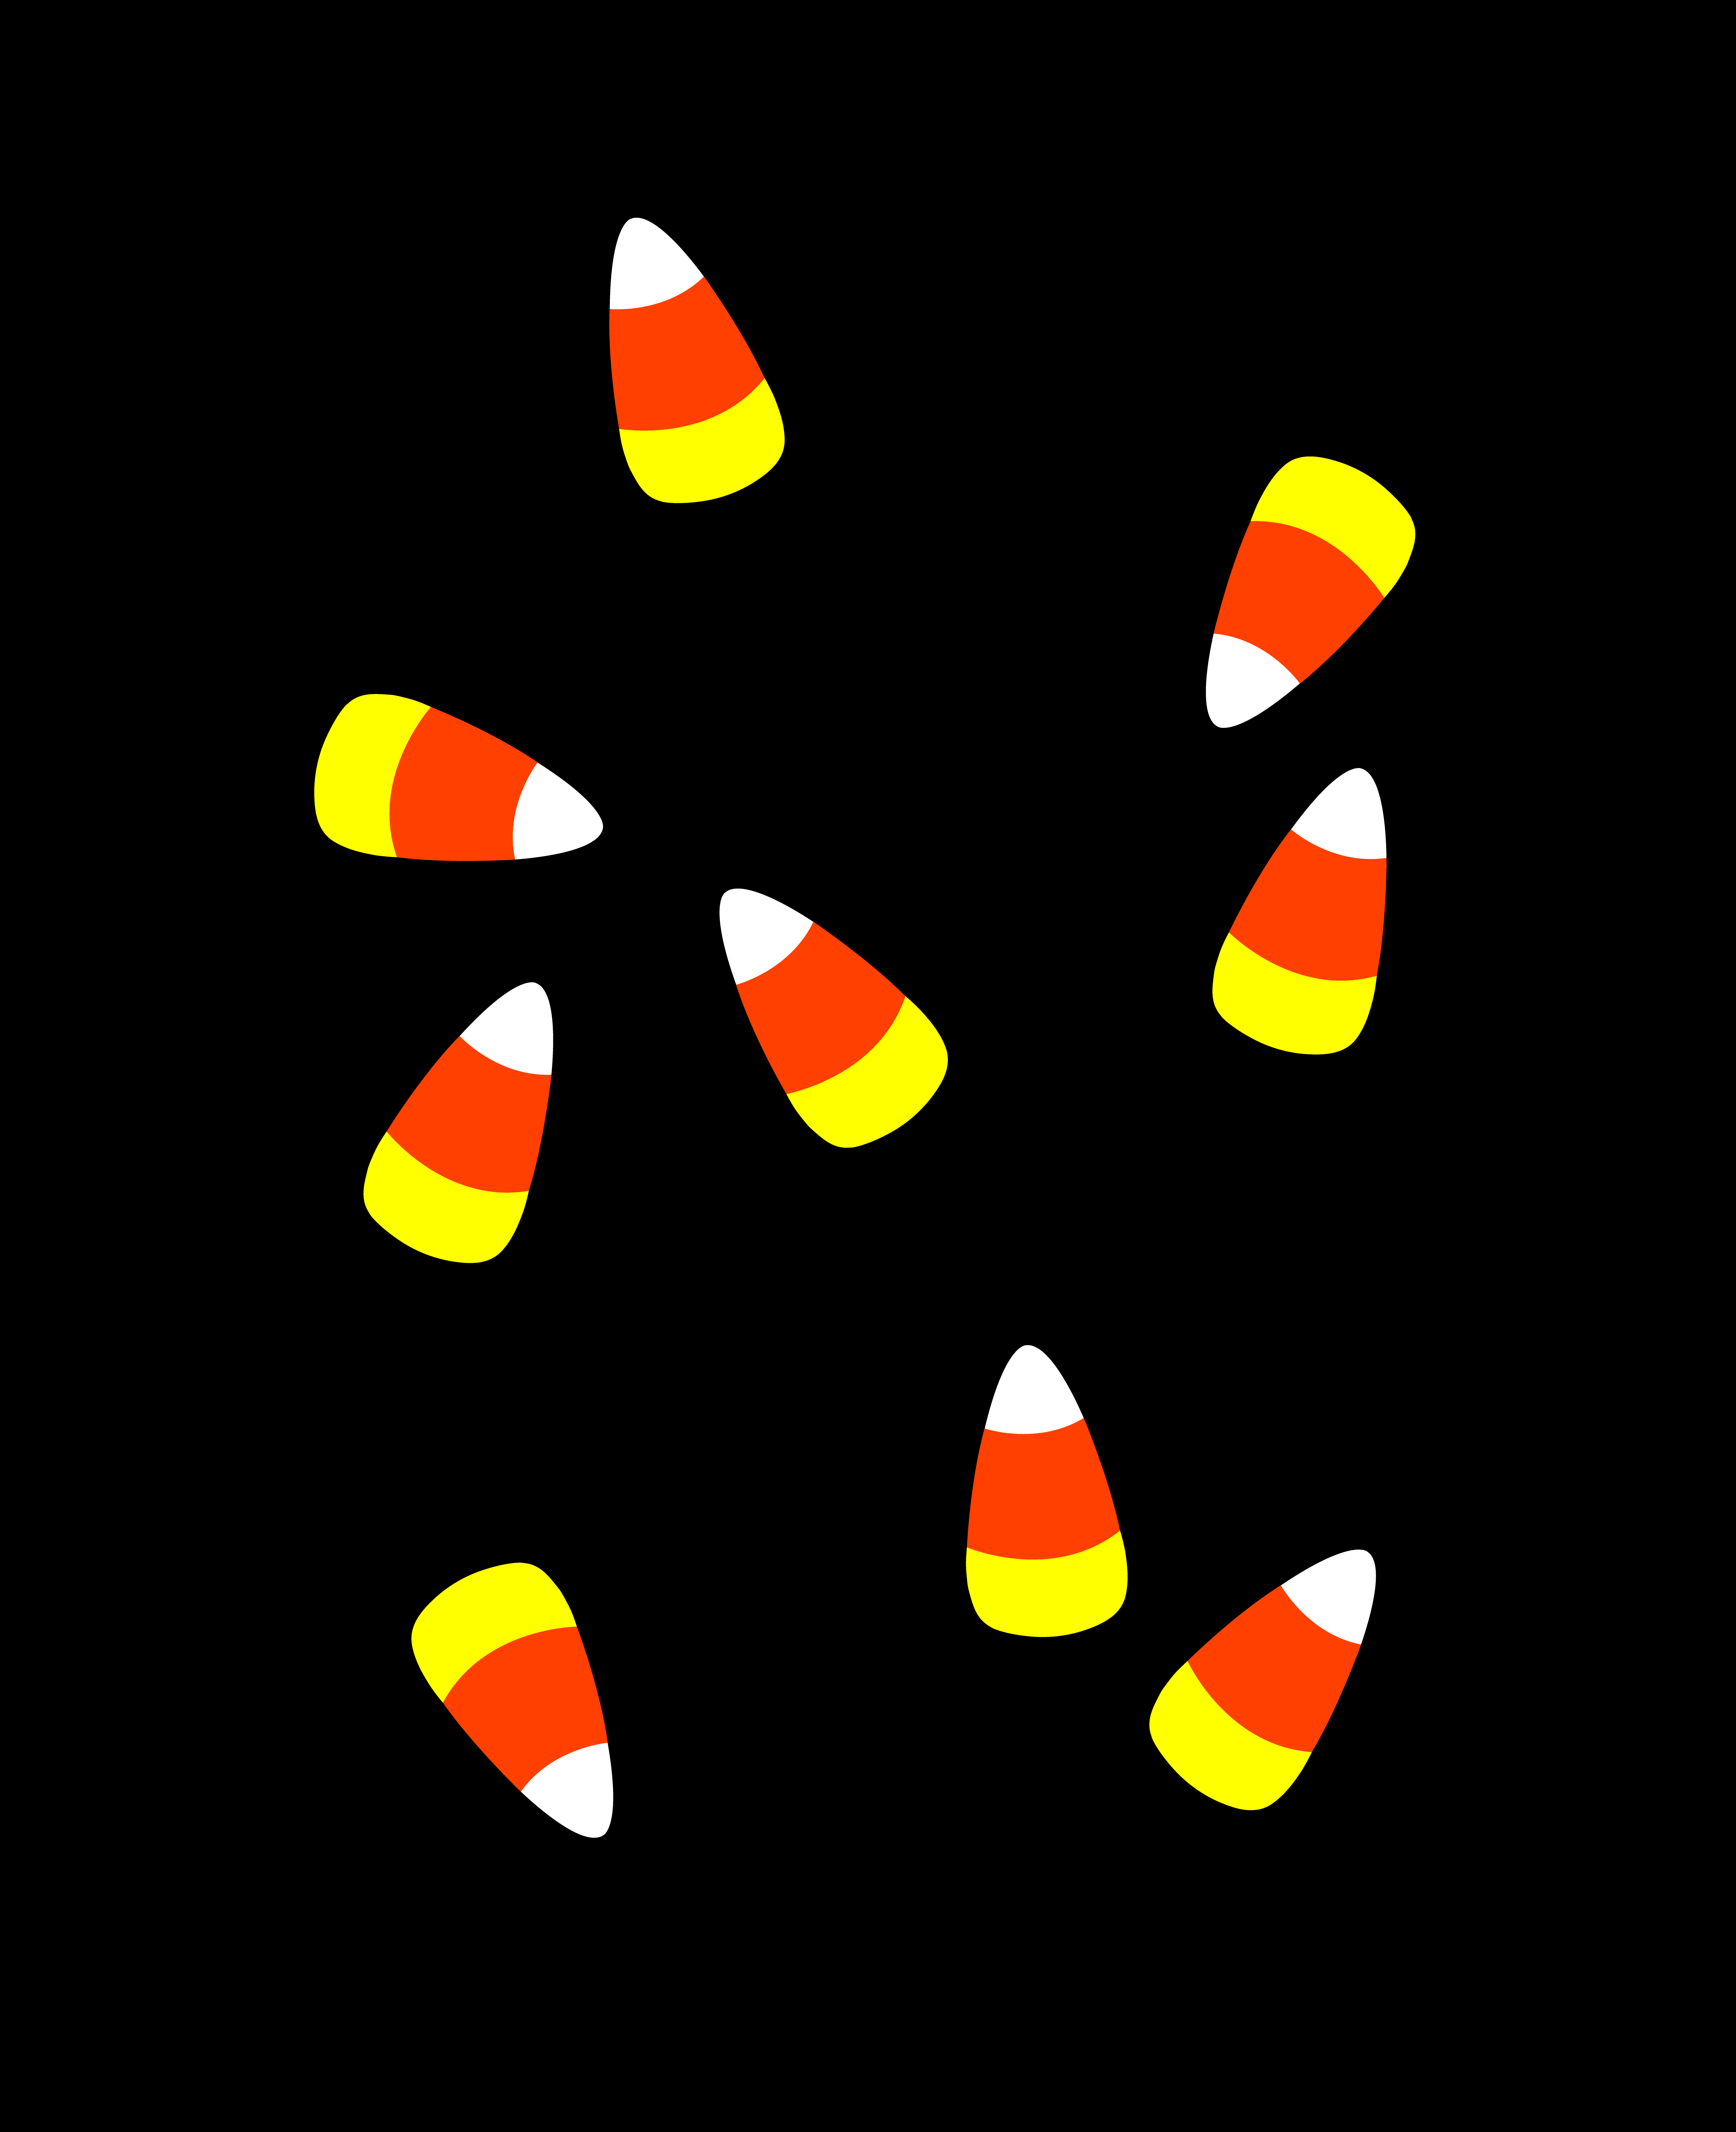 holloween pics. Halloween Candy Corn on Black Background Clip Art. Halloween candy corn, Candy corn, Halloween party candy